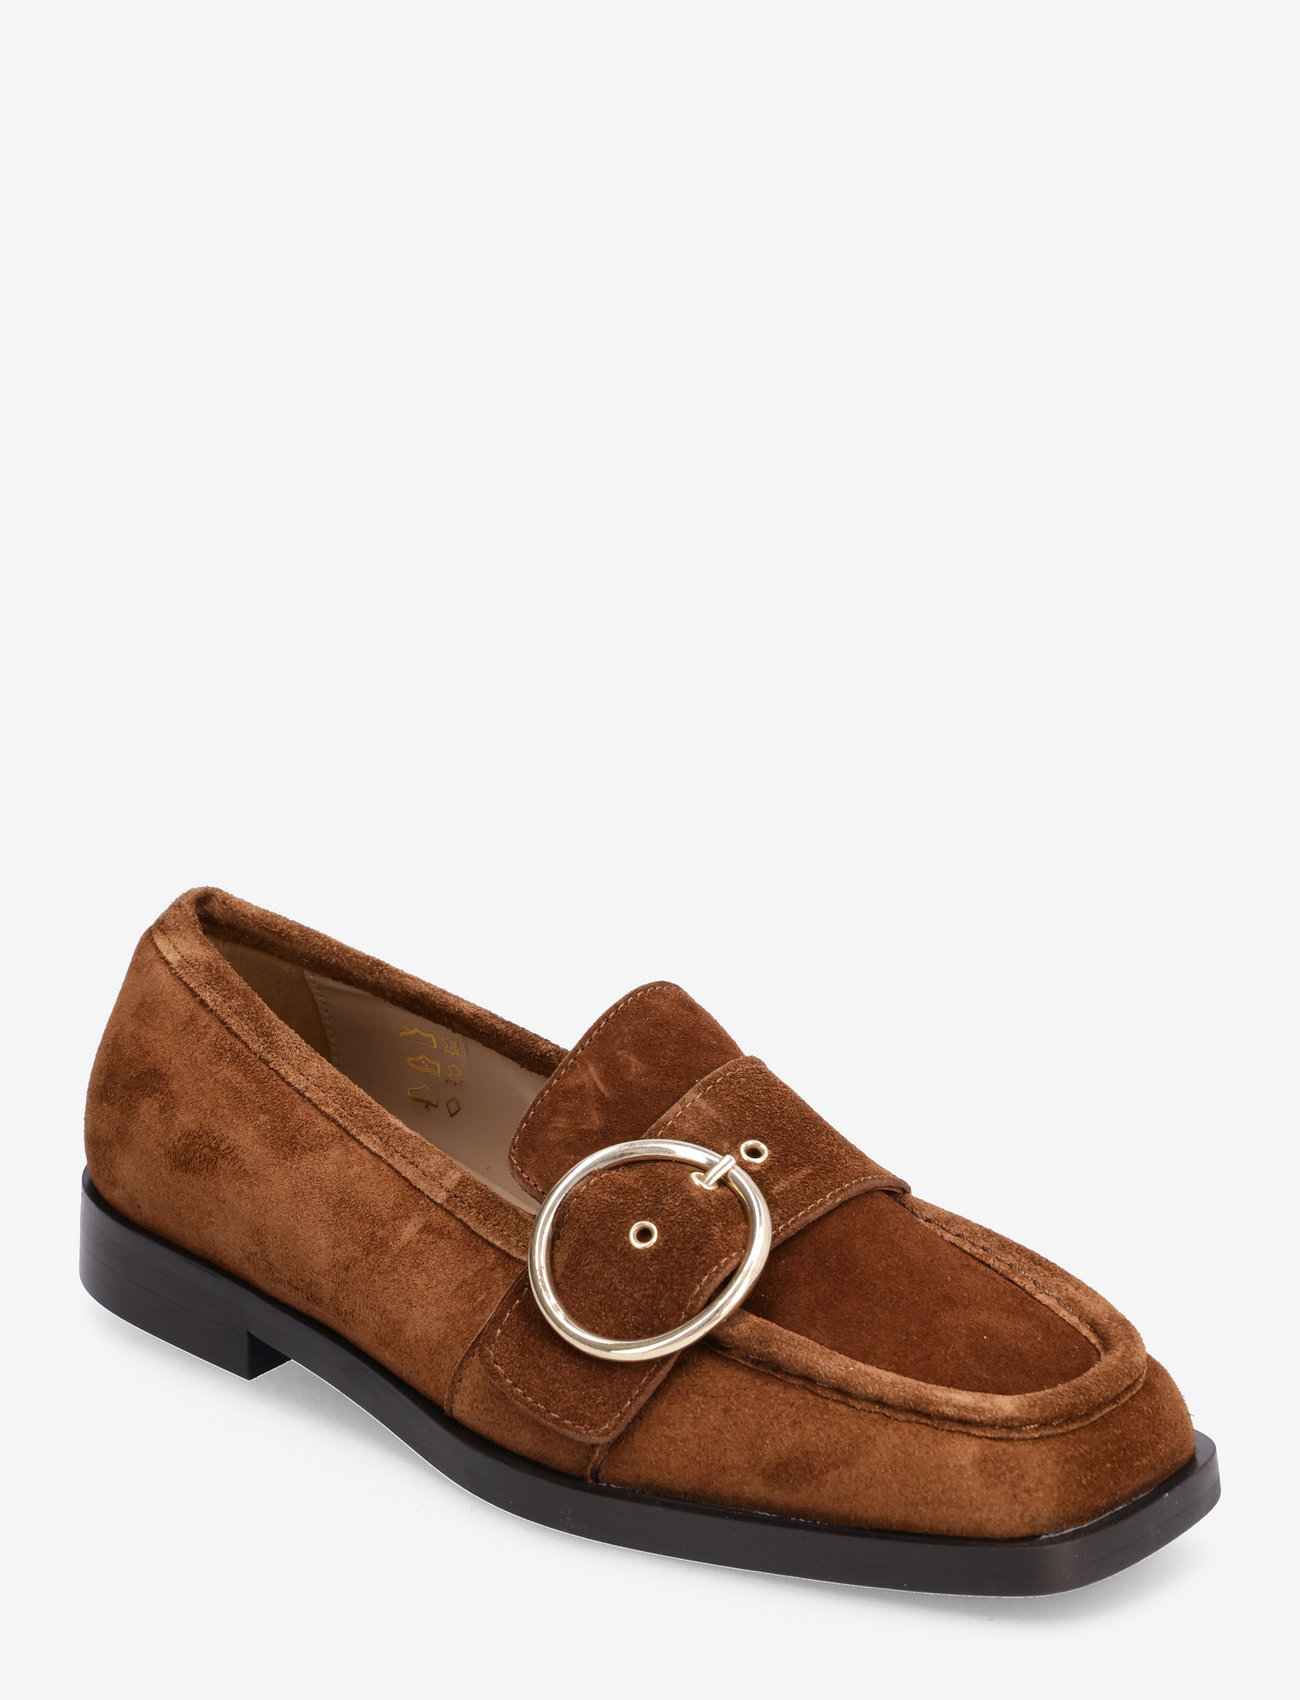 ANGULUS - Shoes - flat - 2231 brown - 0